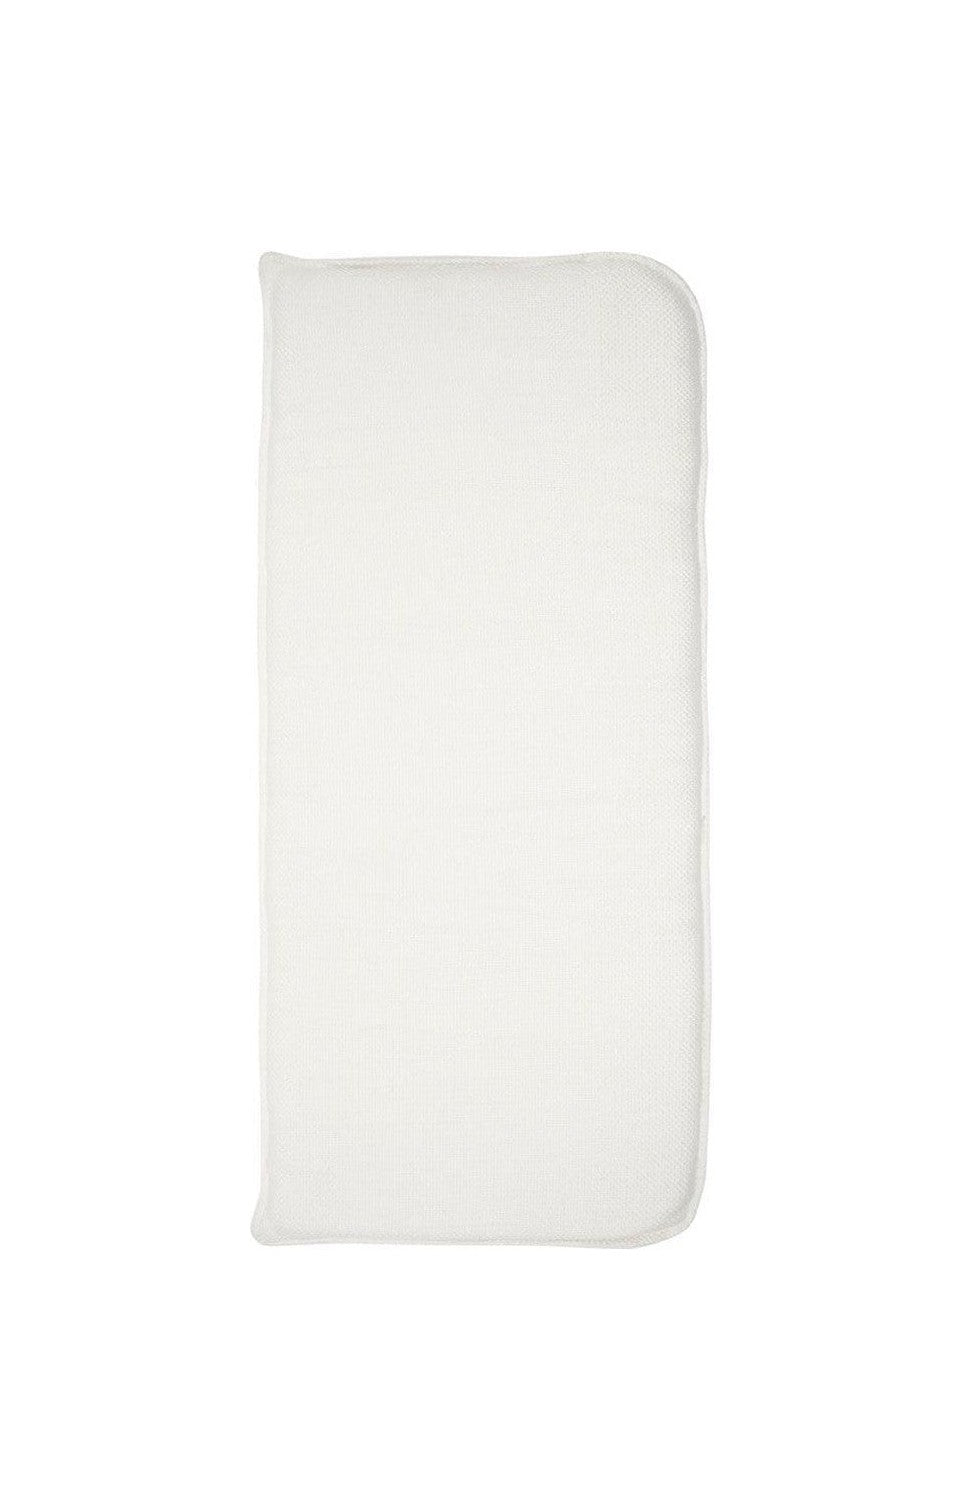 House Doctor Seat cushion w. filling, HDCuun, Off-White